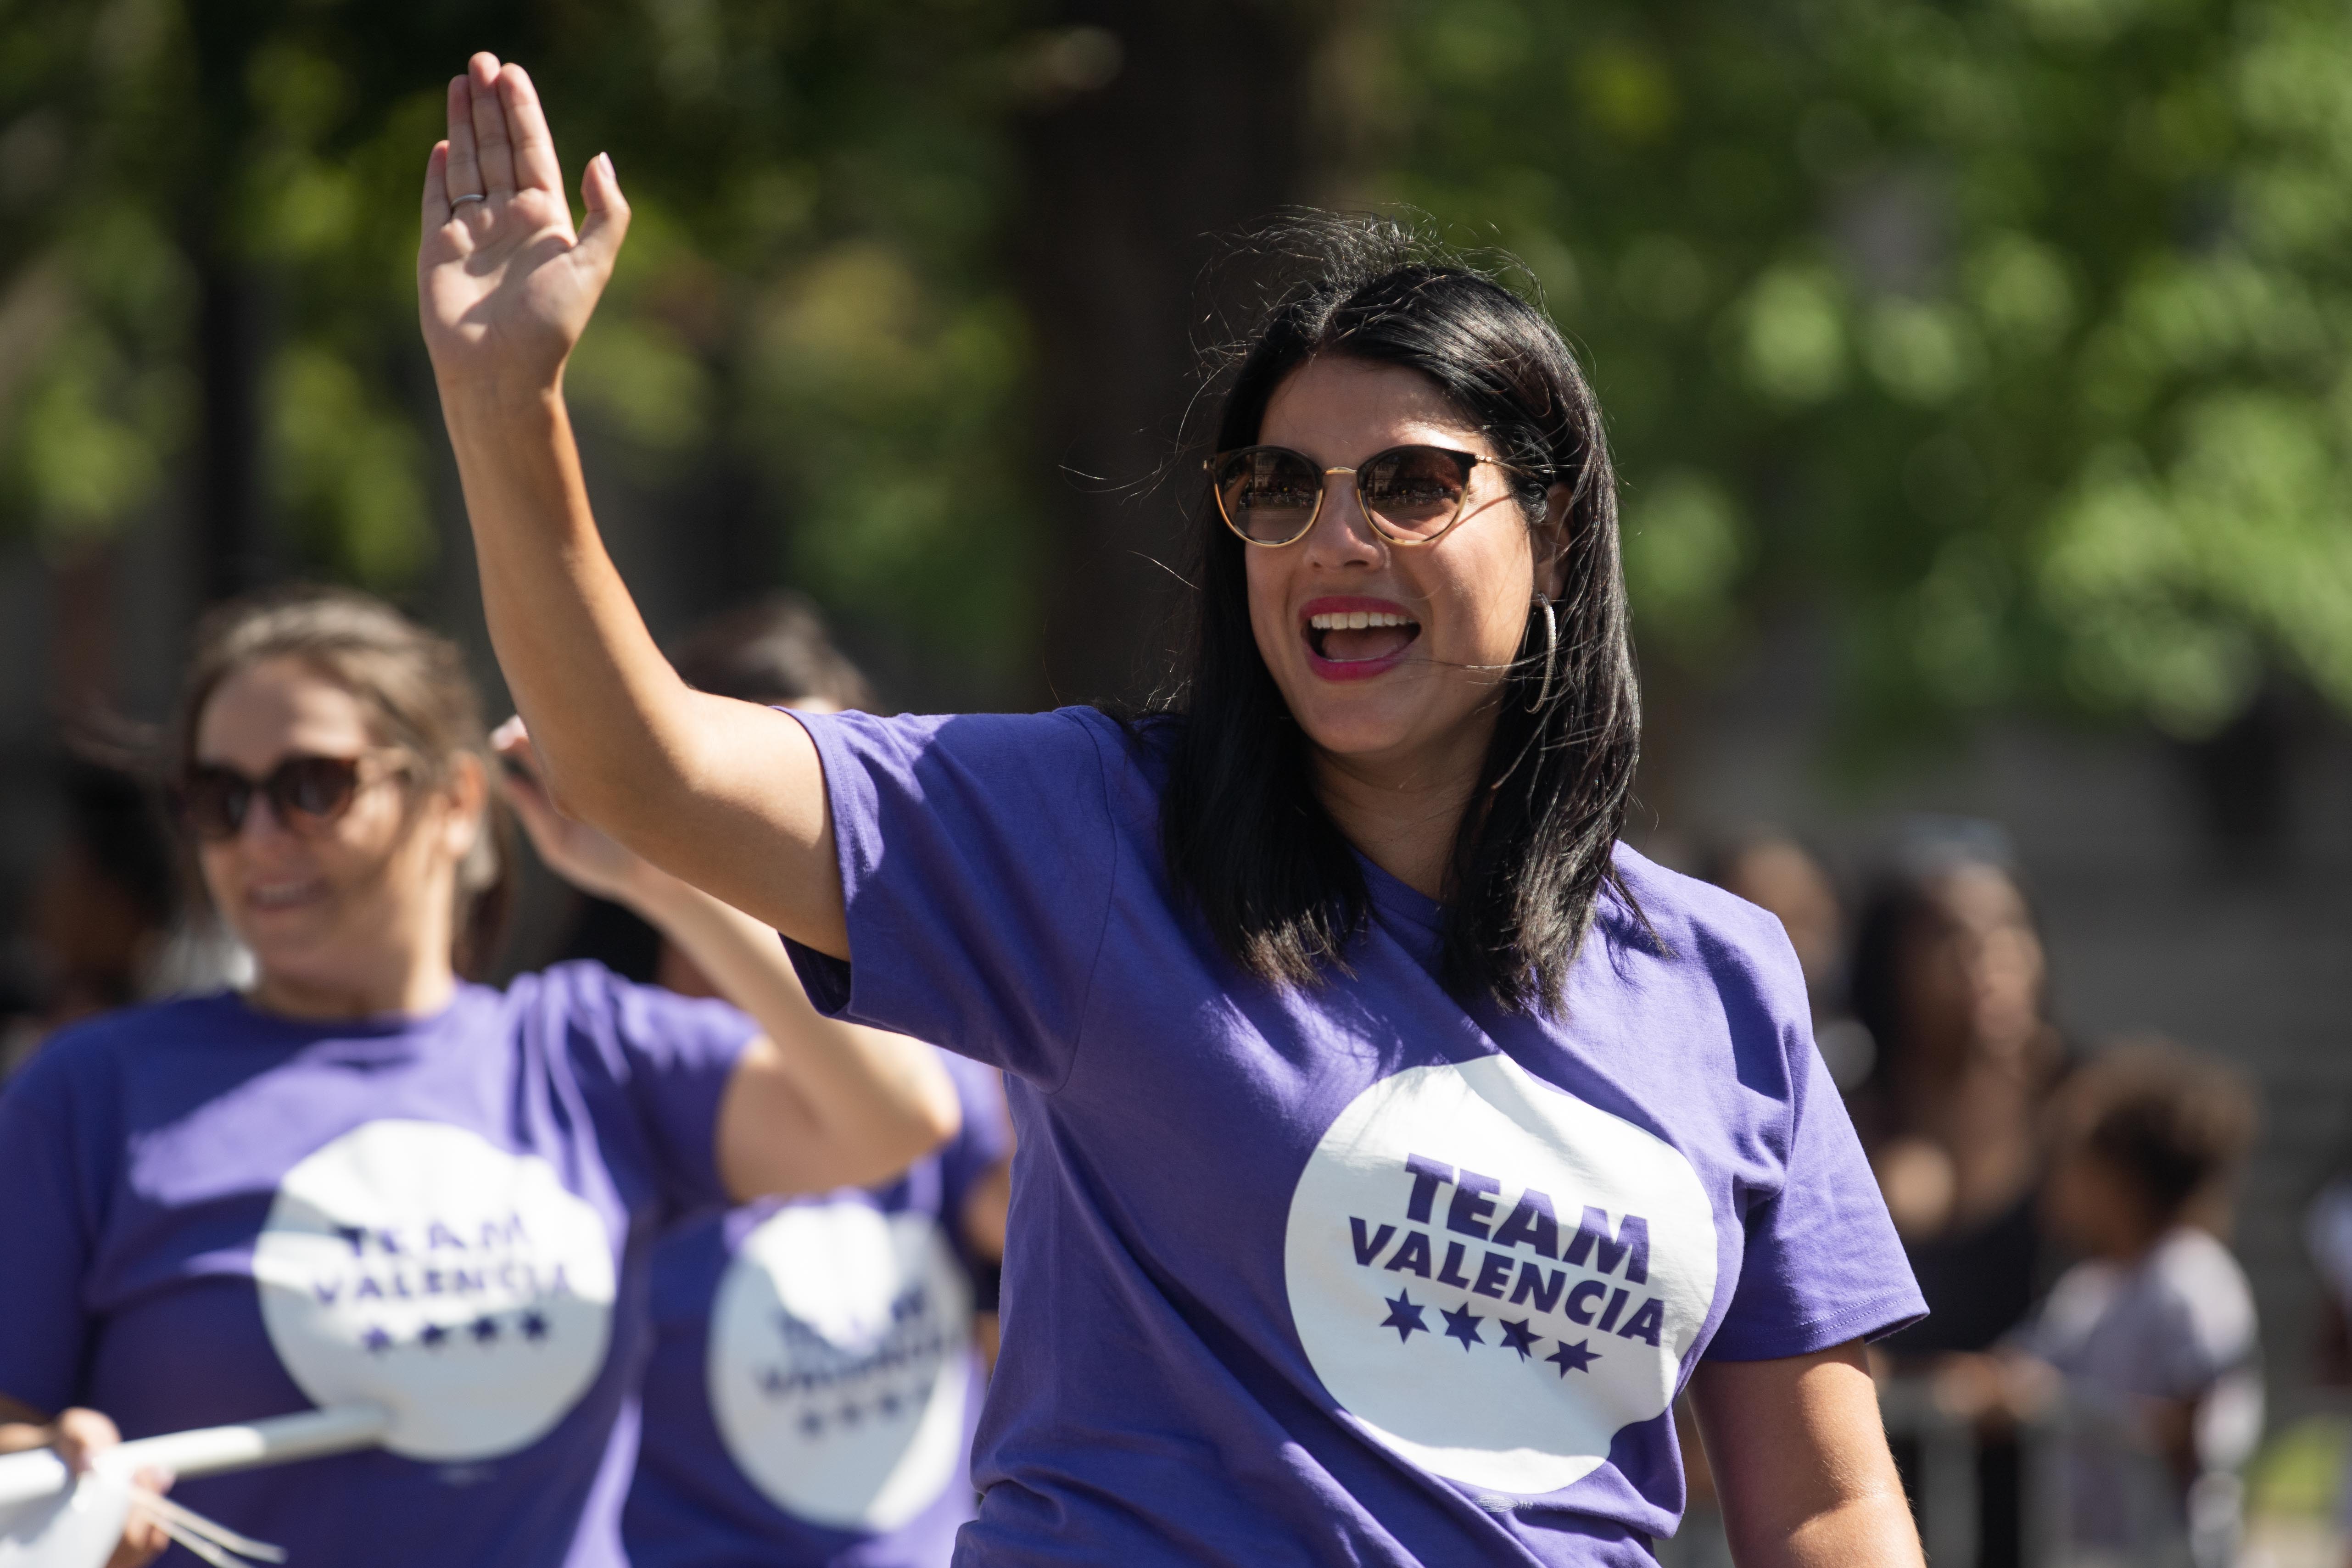 City Clerk Anna Valencia, running for secretary of state, waves to parade-goers during the Bud Billiken Parade in the Bronzeville neighborhood, Saturday, Aug. 14, 2021.